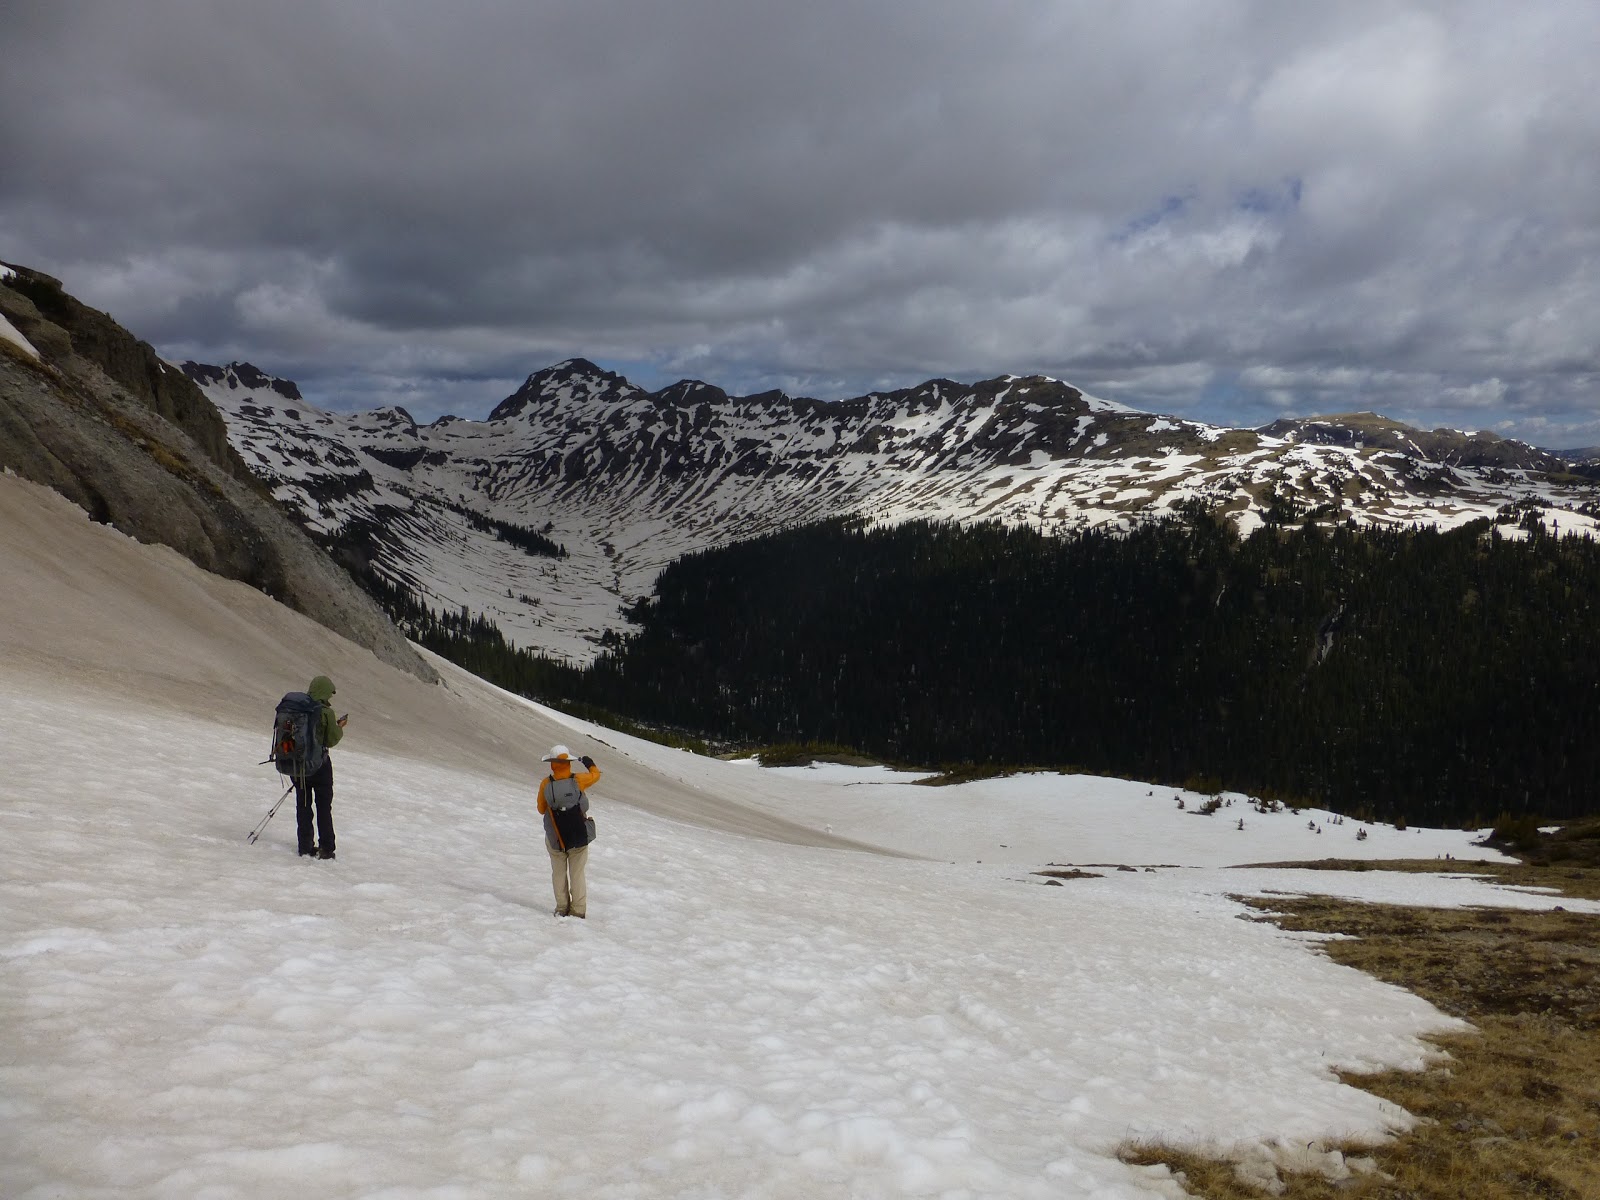 Day 38: Slow and Steady in the San Juans